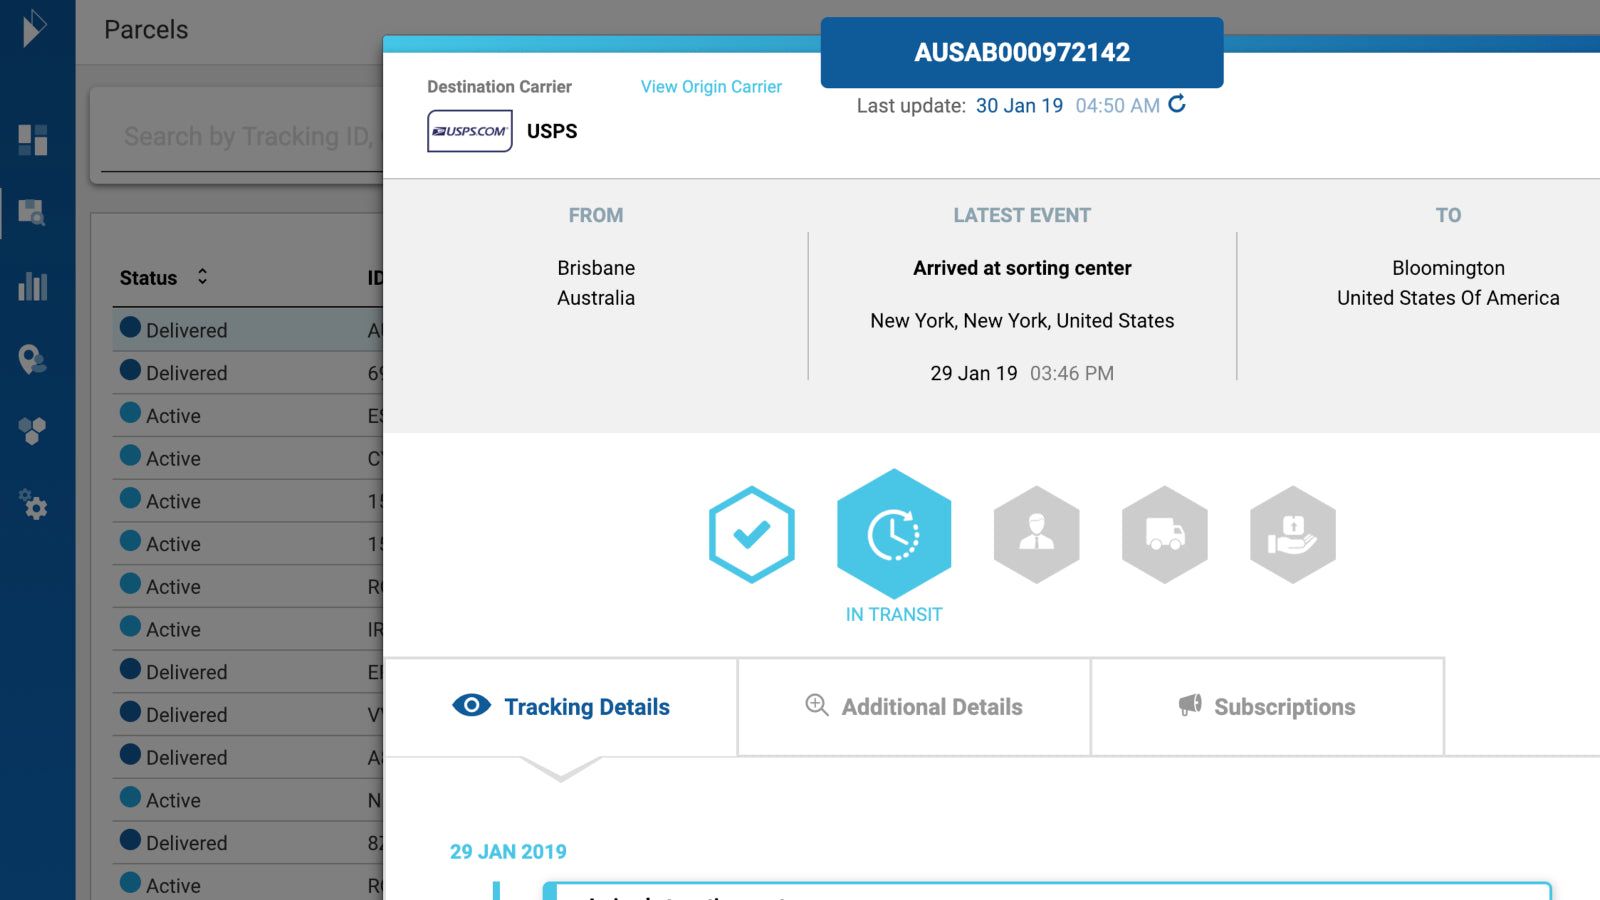 Parcel and order delivery details and track events in a customer